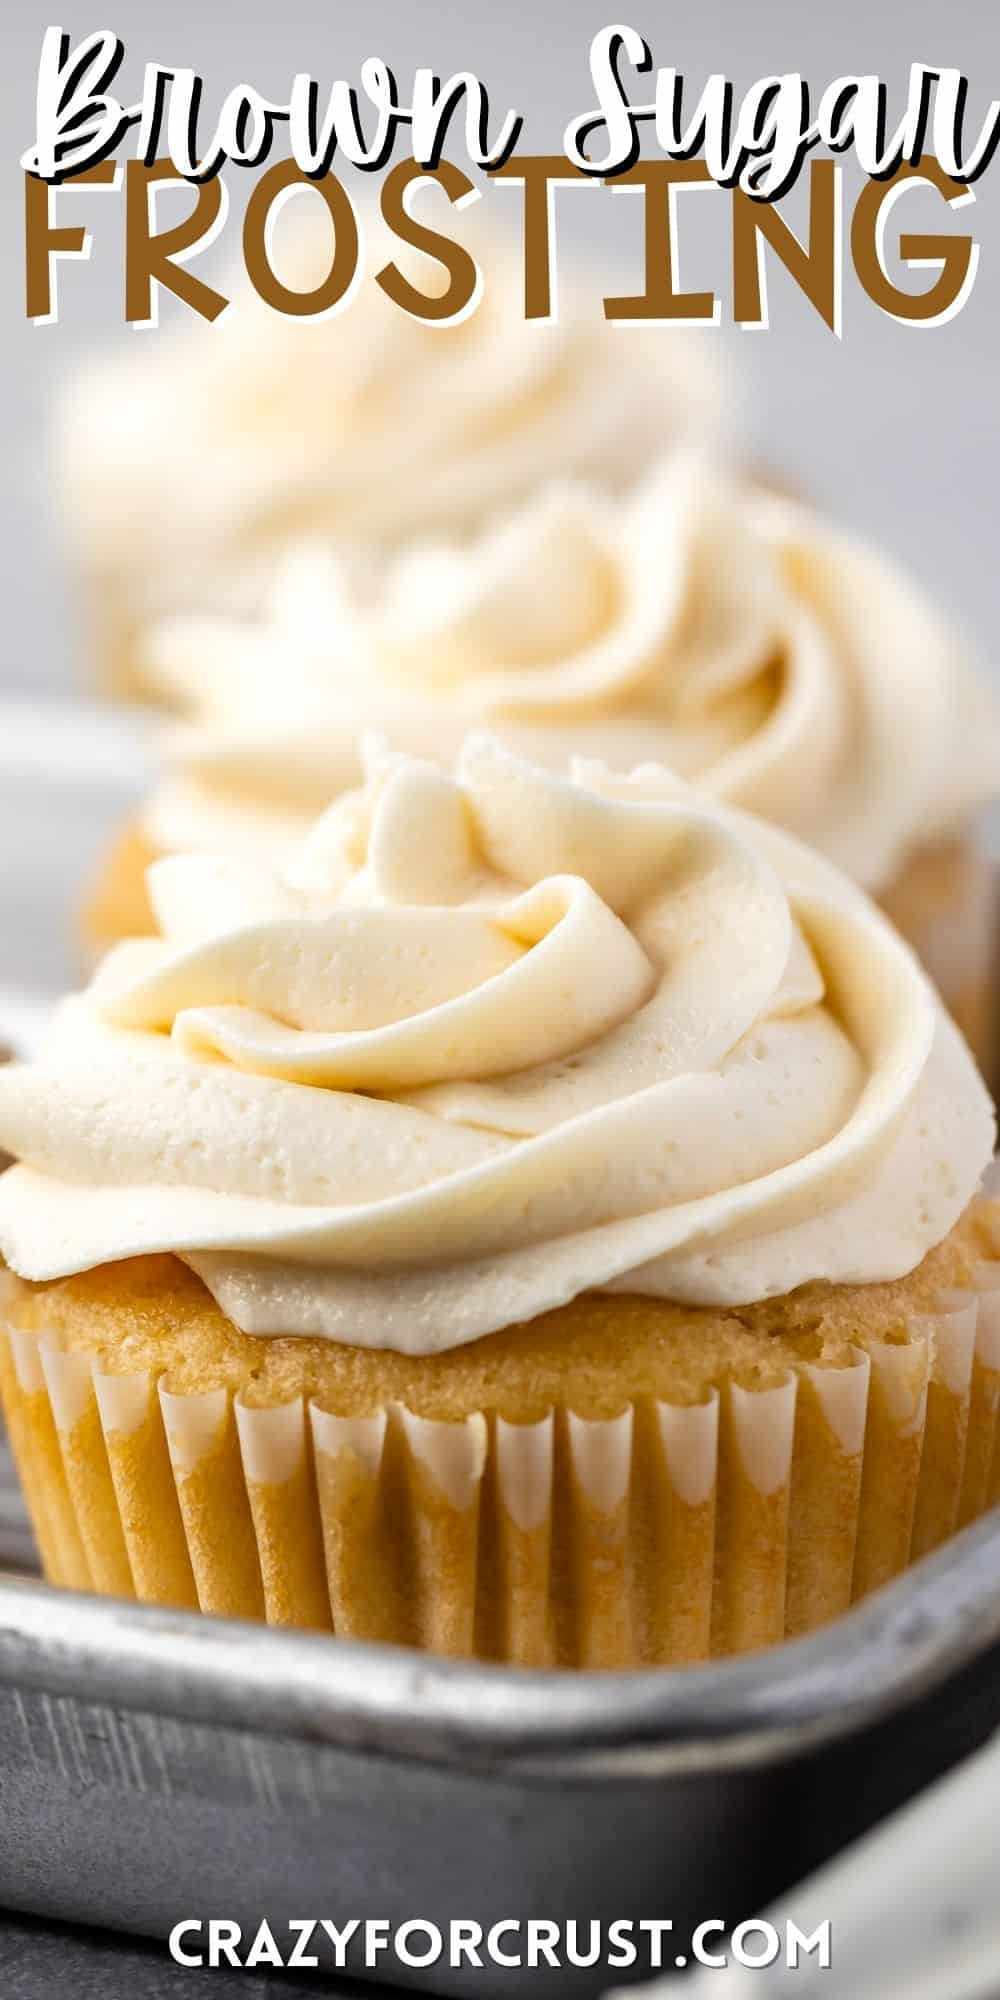 cream colored frosting swirled on top of a cupcake with words on the image.